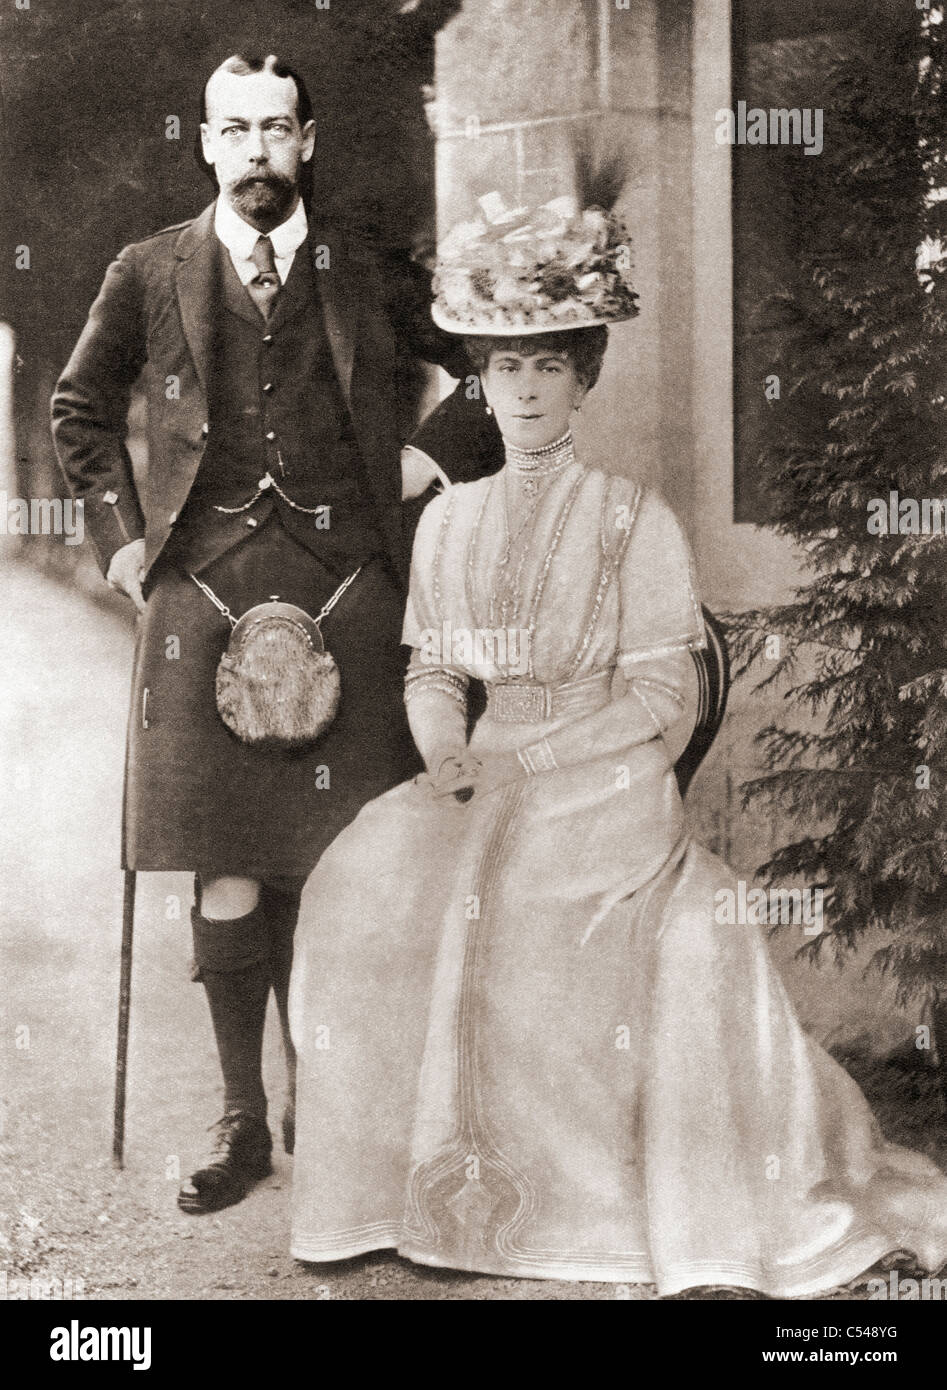 The Prince of Wales, later King George V, with his wife Mary of Teck in 1909. Stock Photo